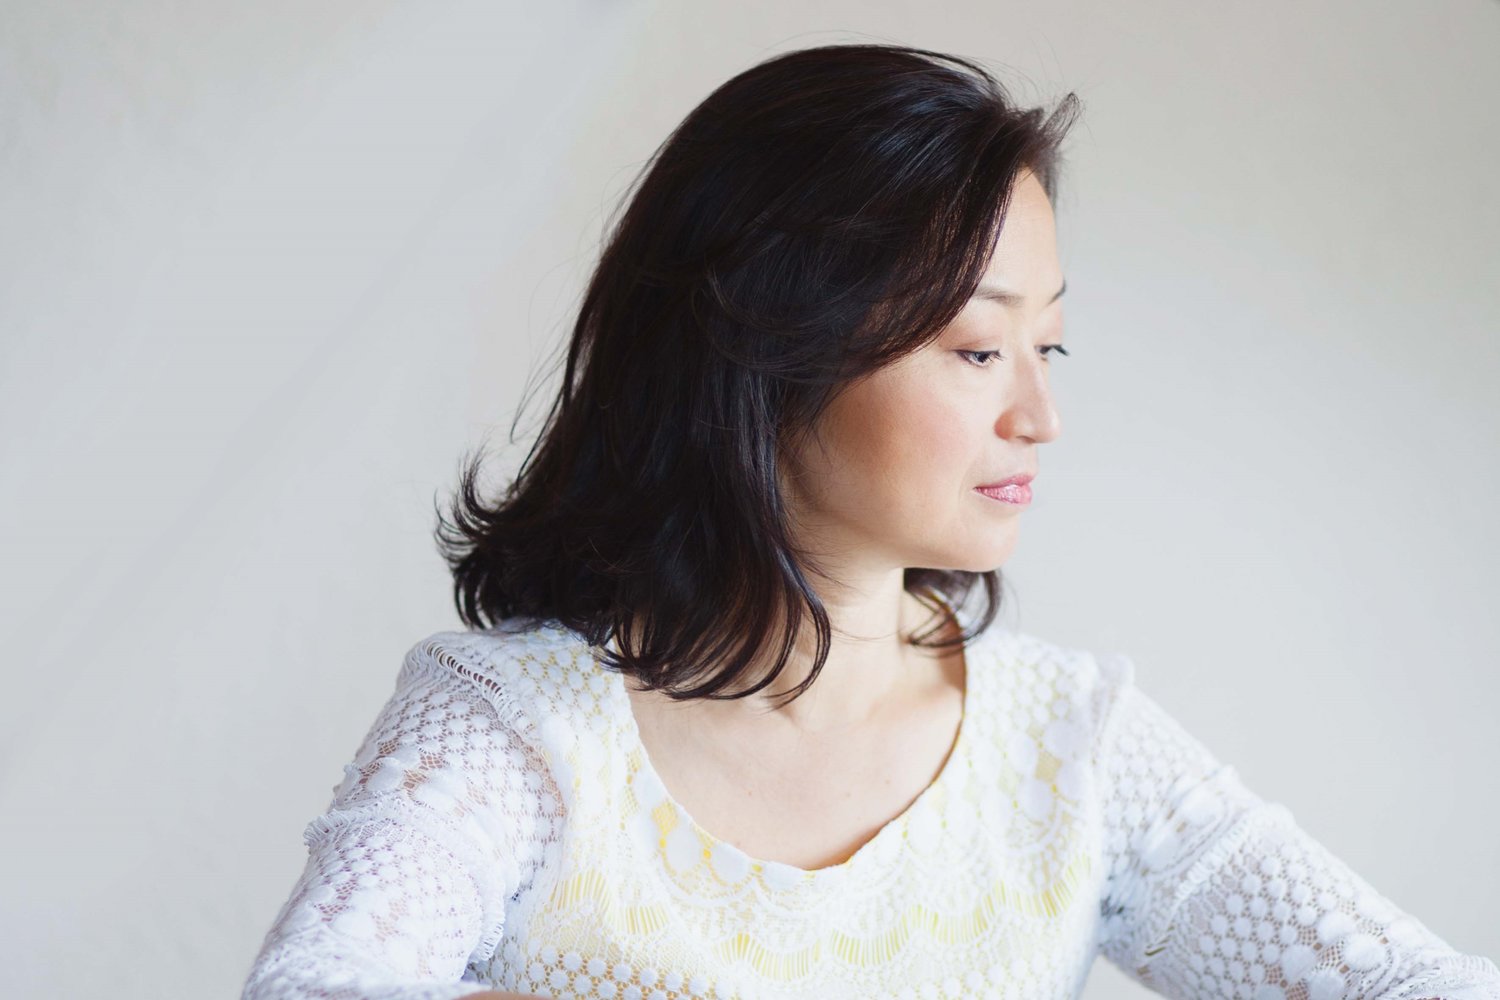 Pianist Hyunsoon Whang will perform music by Debussy and Fauré at a Jan. 16 concert.